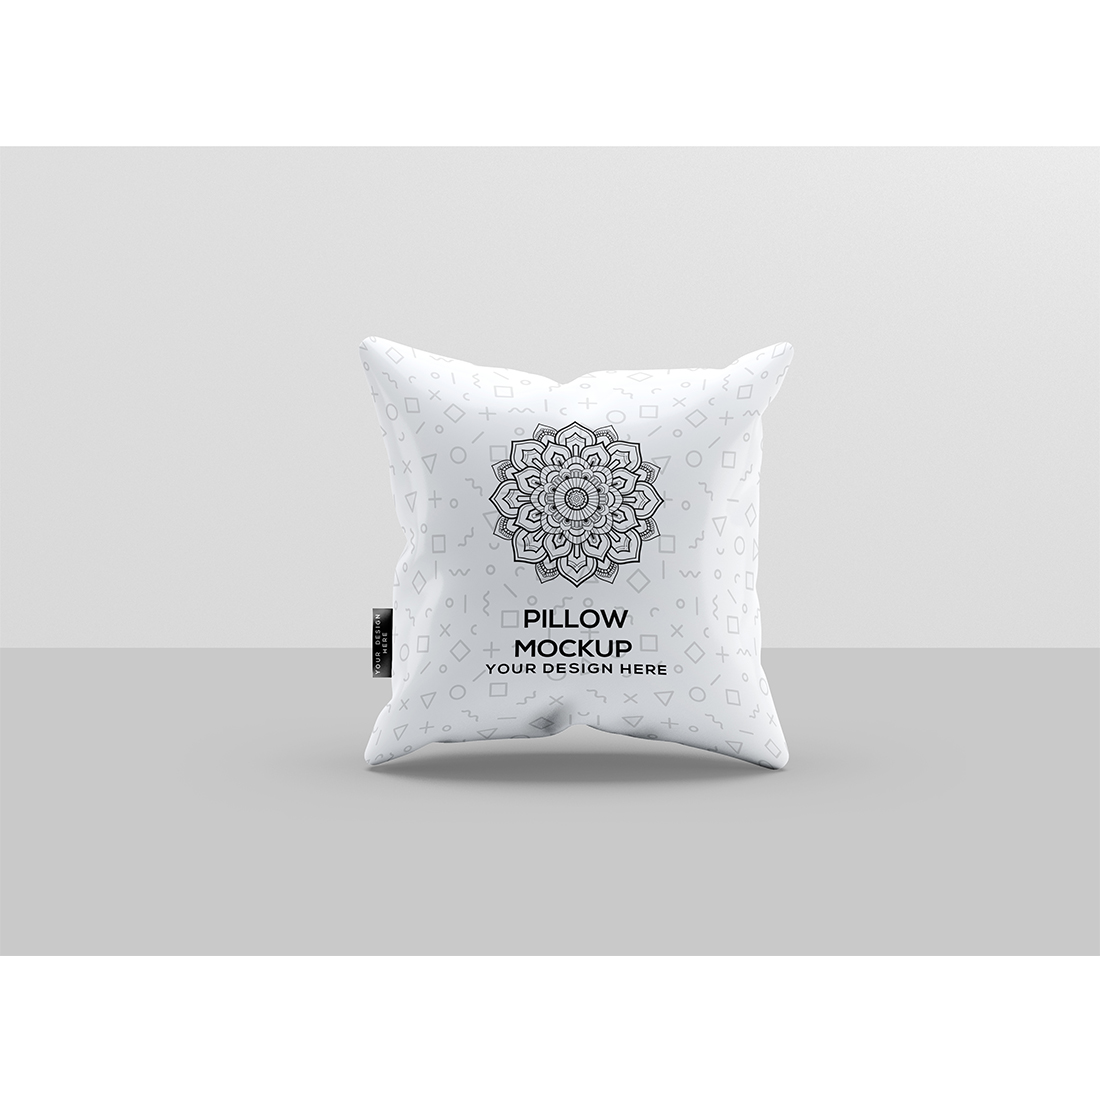 Square Pillow Mockup cover image.